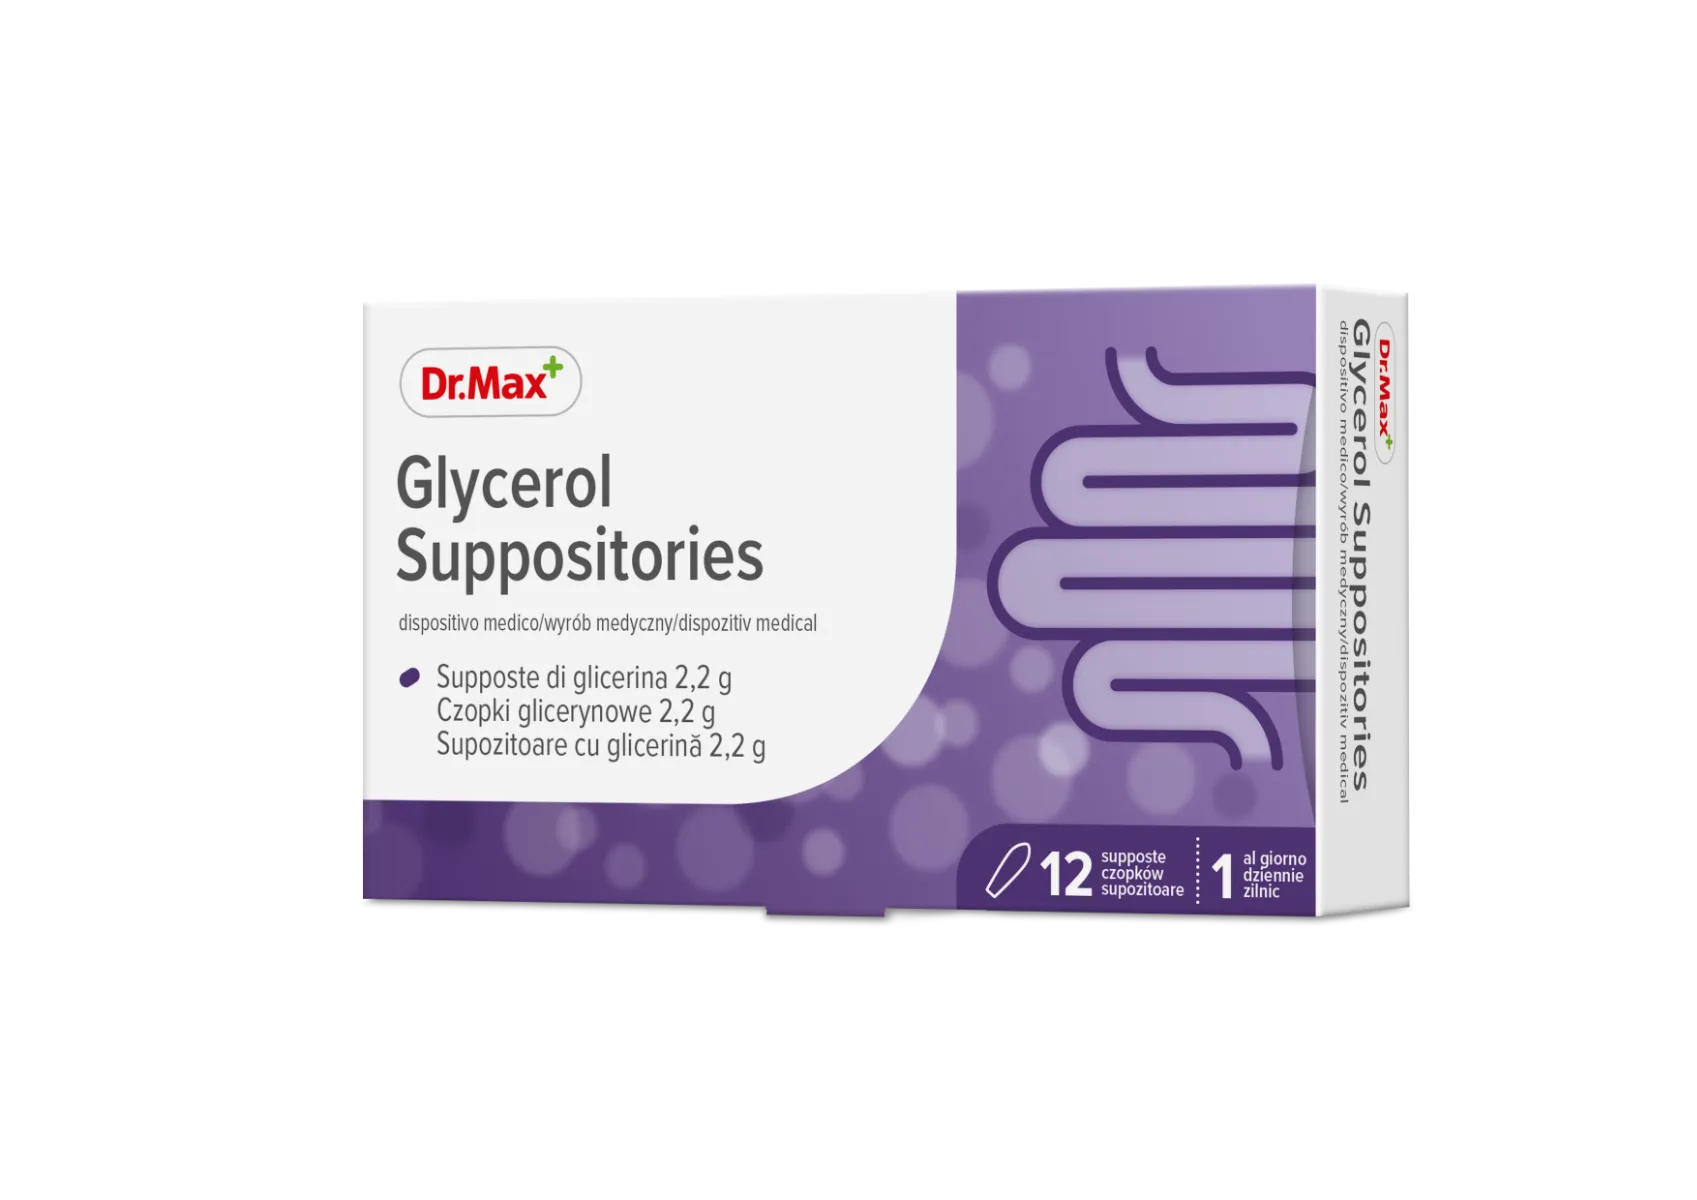 Dr.Max Glycerol Suppositories 12 Supposte